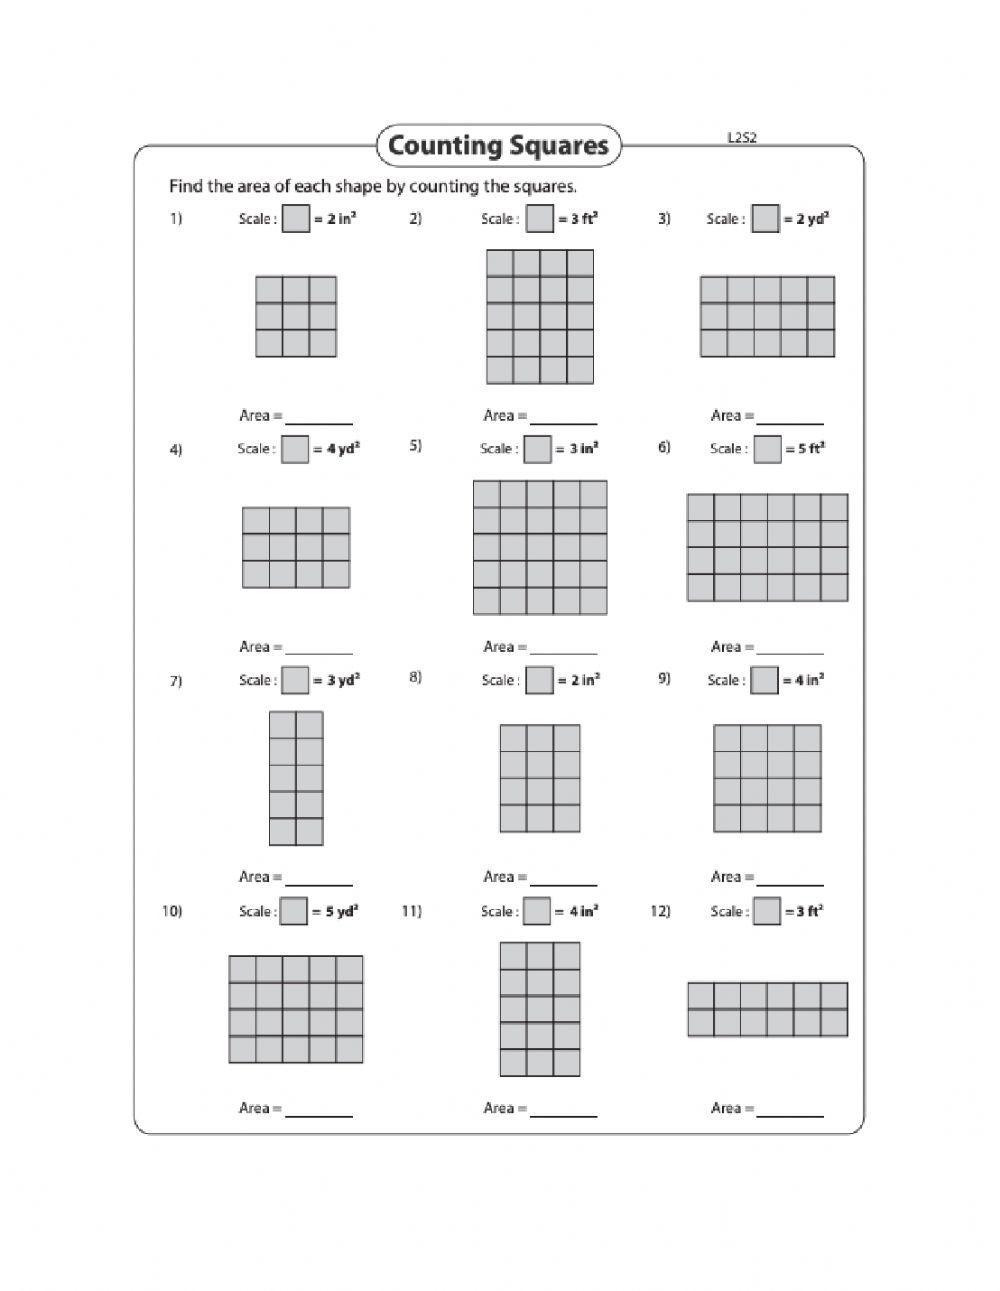 Area - Counting Squares - Day 4 Level 2